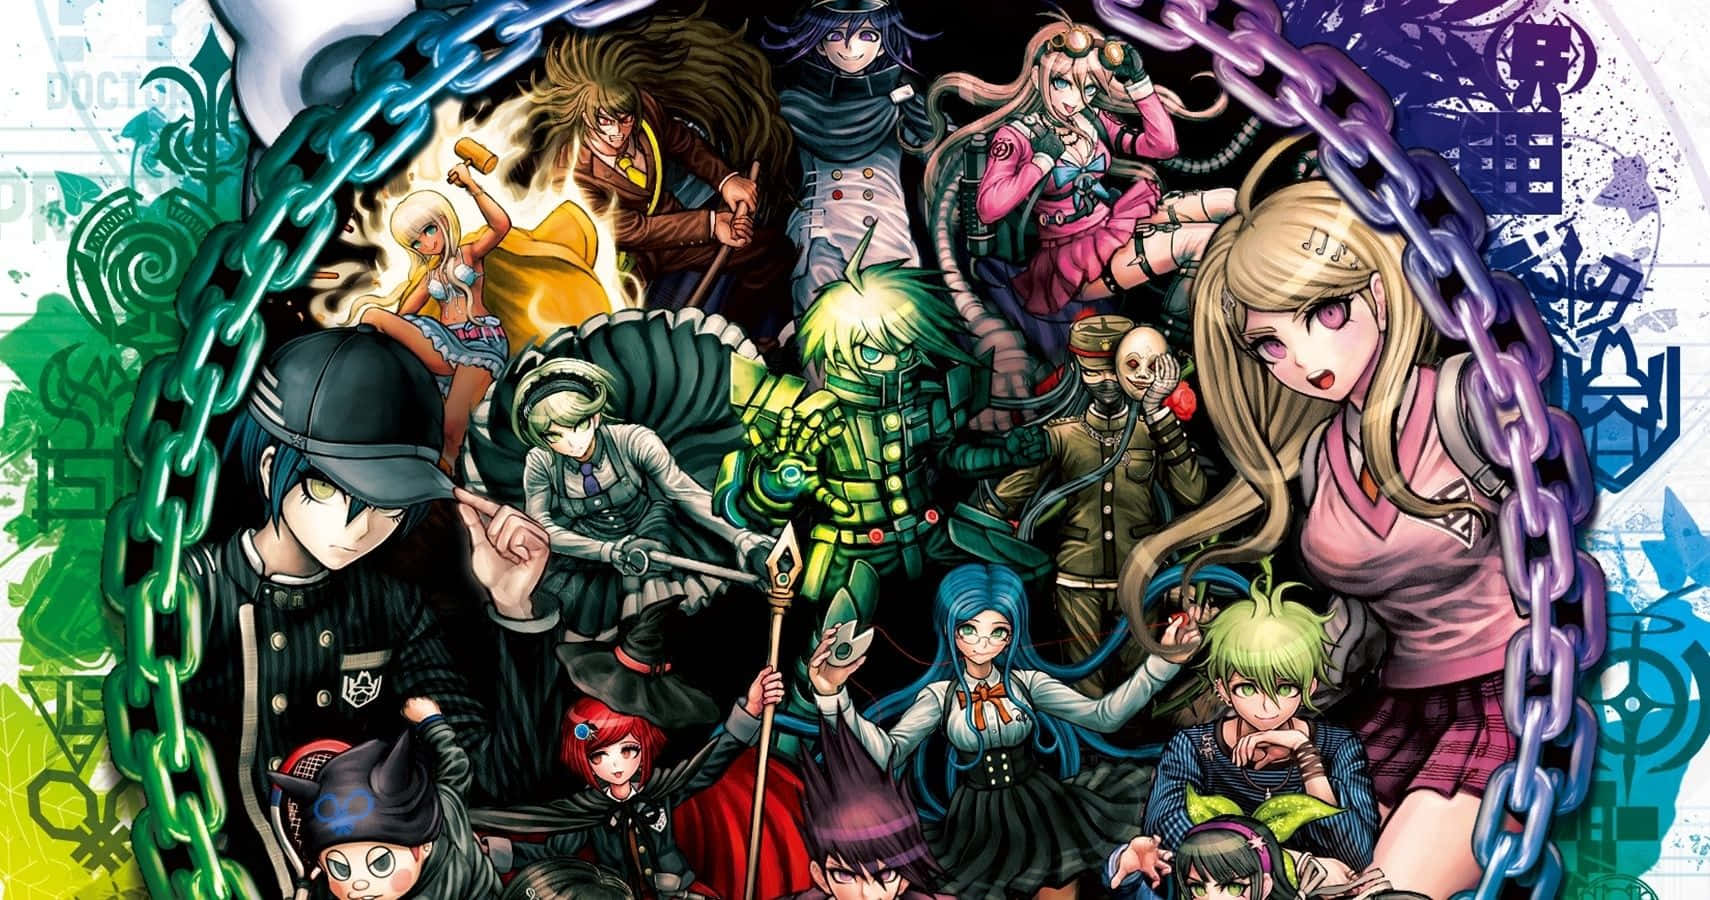 Stand Out from the Crowd with Danganronpa V3 Wallpaper